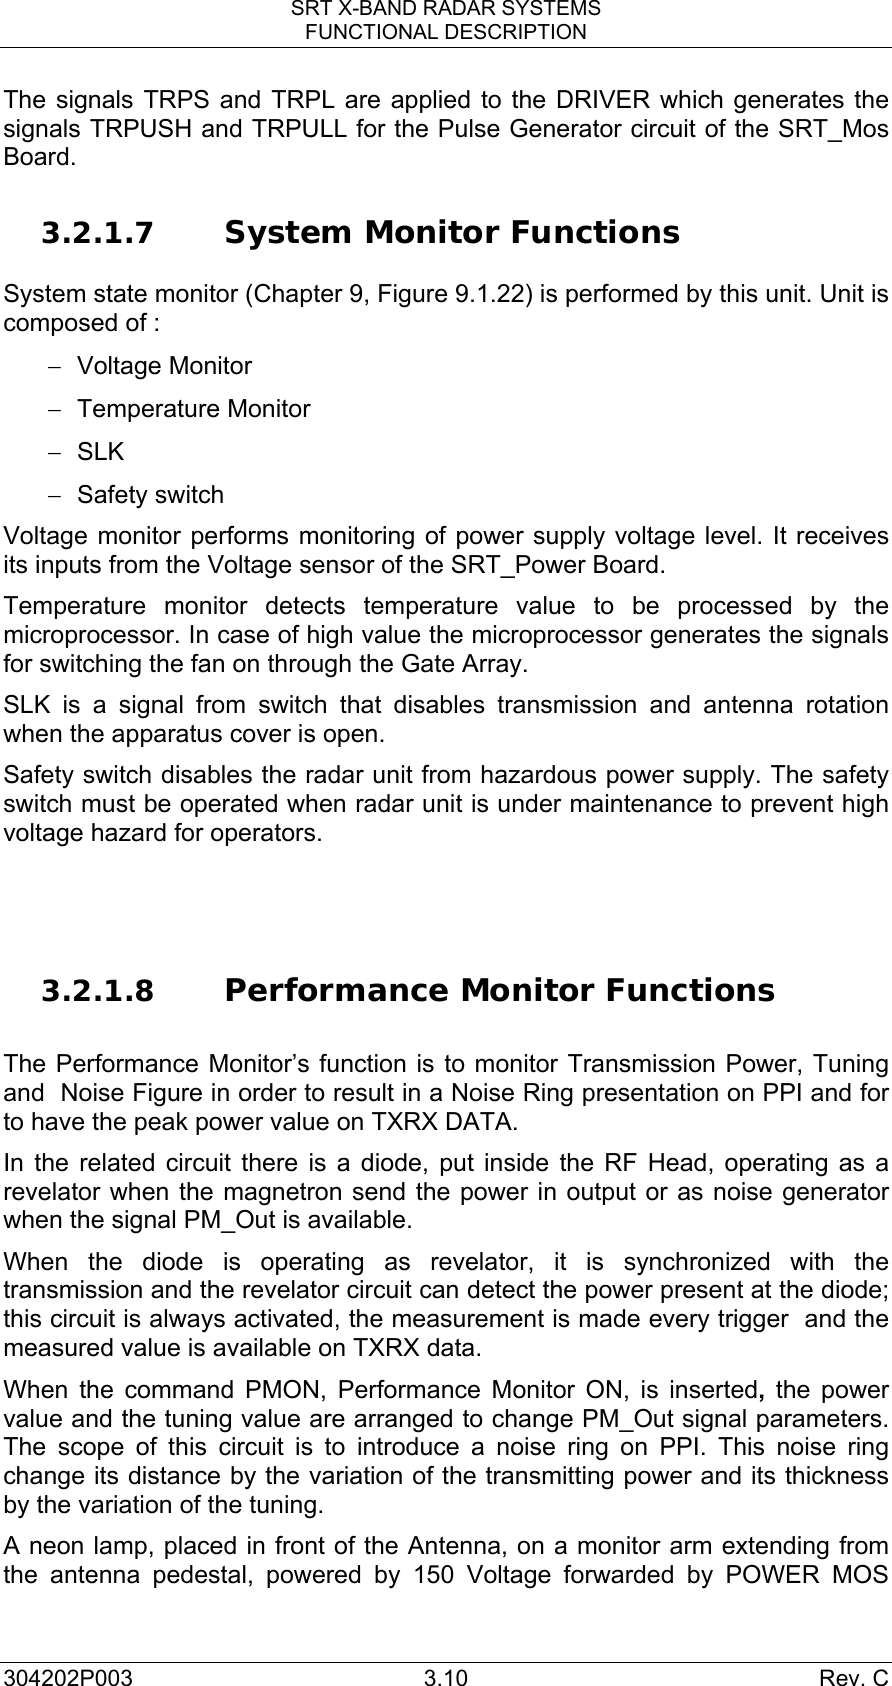 SRT X-BAND RADAR SYSTEMS FUNCTIONAL DESCRIPTION 304202P003 3.10  Rev. C The signals TRPS and TRPL are applied to the DRIVER which generates the signals TRPUSH and TRPULL for the Pulse Generator circuit of the SRT_Mos Board.  3.2.1.7 System Monitor Functions  System state monitor (Chapter 9, Figure 9.1.22) is performed by this unit. Unit is composed of : − Voltage Monitor − Temperature Monitor − SLK  − Safety switch Voltage monitor performs monitoring of power supply voltage level. It receives its inputs from the Voltage sensor of the SRT_Power Board. Temperature monitor detects temperature value to be processed by the microprocessor. In case of high value the microprocessor generates the signals for switching the fan on through the Gate Array.  SLK is a signal from switch that disables transmission and antenna rotation when the apparatus cover is open.  Safety switch disables the radar unit from hazardous power supply. The safety switch must be operated when radar unit is under maintenance to prevent high voltage hazard for operators.    3.2.1.8 Performance Monitor Functions   The Performance Monitor’s function is to monitor Transmission Power, Tuning and  Noise Figure in order to result in a Noise Ring presentation on PPI and for to have the peak power value on TXRX DATA. In the related circuit there is a diode, put inside the RF Head, operating as a revelator when the magnetron send the power in output or as noise generator when the signal PM_Out is available.  When the diode is operating as revelator, it is synchronized with the transmission and the revelator circuit can detect the power present at the diode; this circuit is always activated, the measurement is made every trigger  and the measured value is available on TXRX data. When the command PMON, Performance Monitor ON, is inserted,  the power value and the tuning value are arranged to change PM_Out signal parameters. The scope of this circuit is to introduce a noise ring on PPI. This noise ring change its distance by the variation of the transmitting power and its thickness by the variation of the tuning. A neon lamp, placed in front of the Antenna, on a monitor arm extending from the antenna pedestal, powered by 150 Voltage forwarded by POWER MOS 